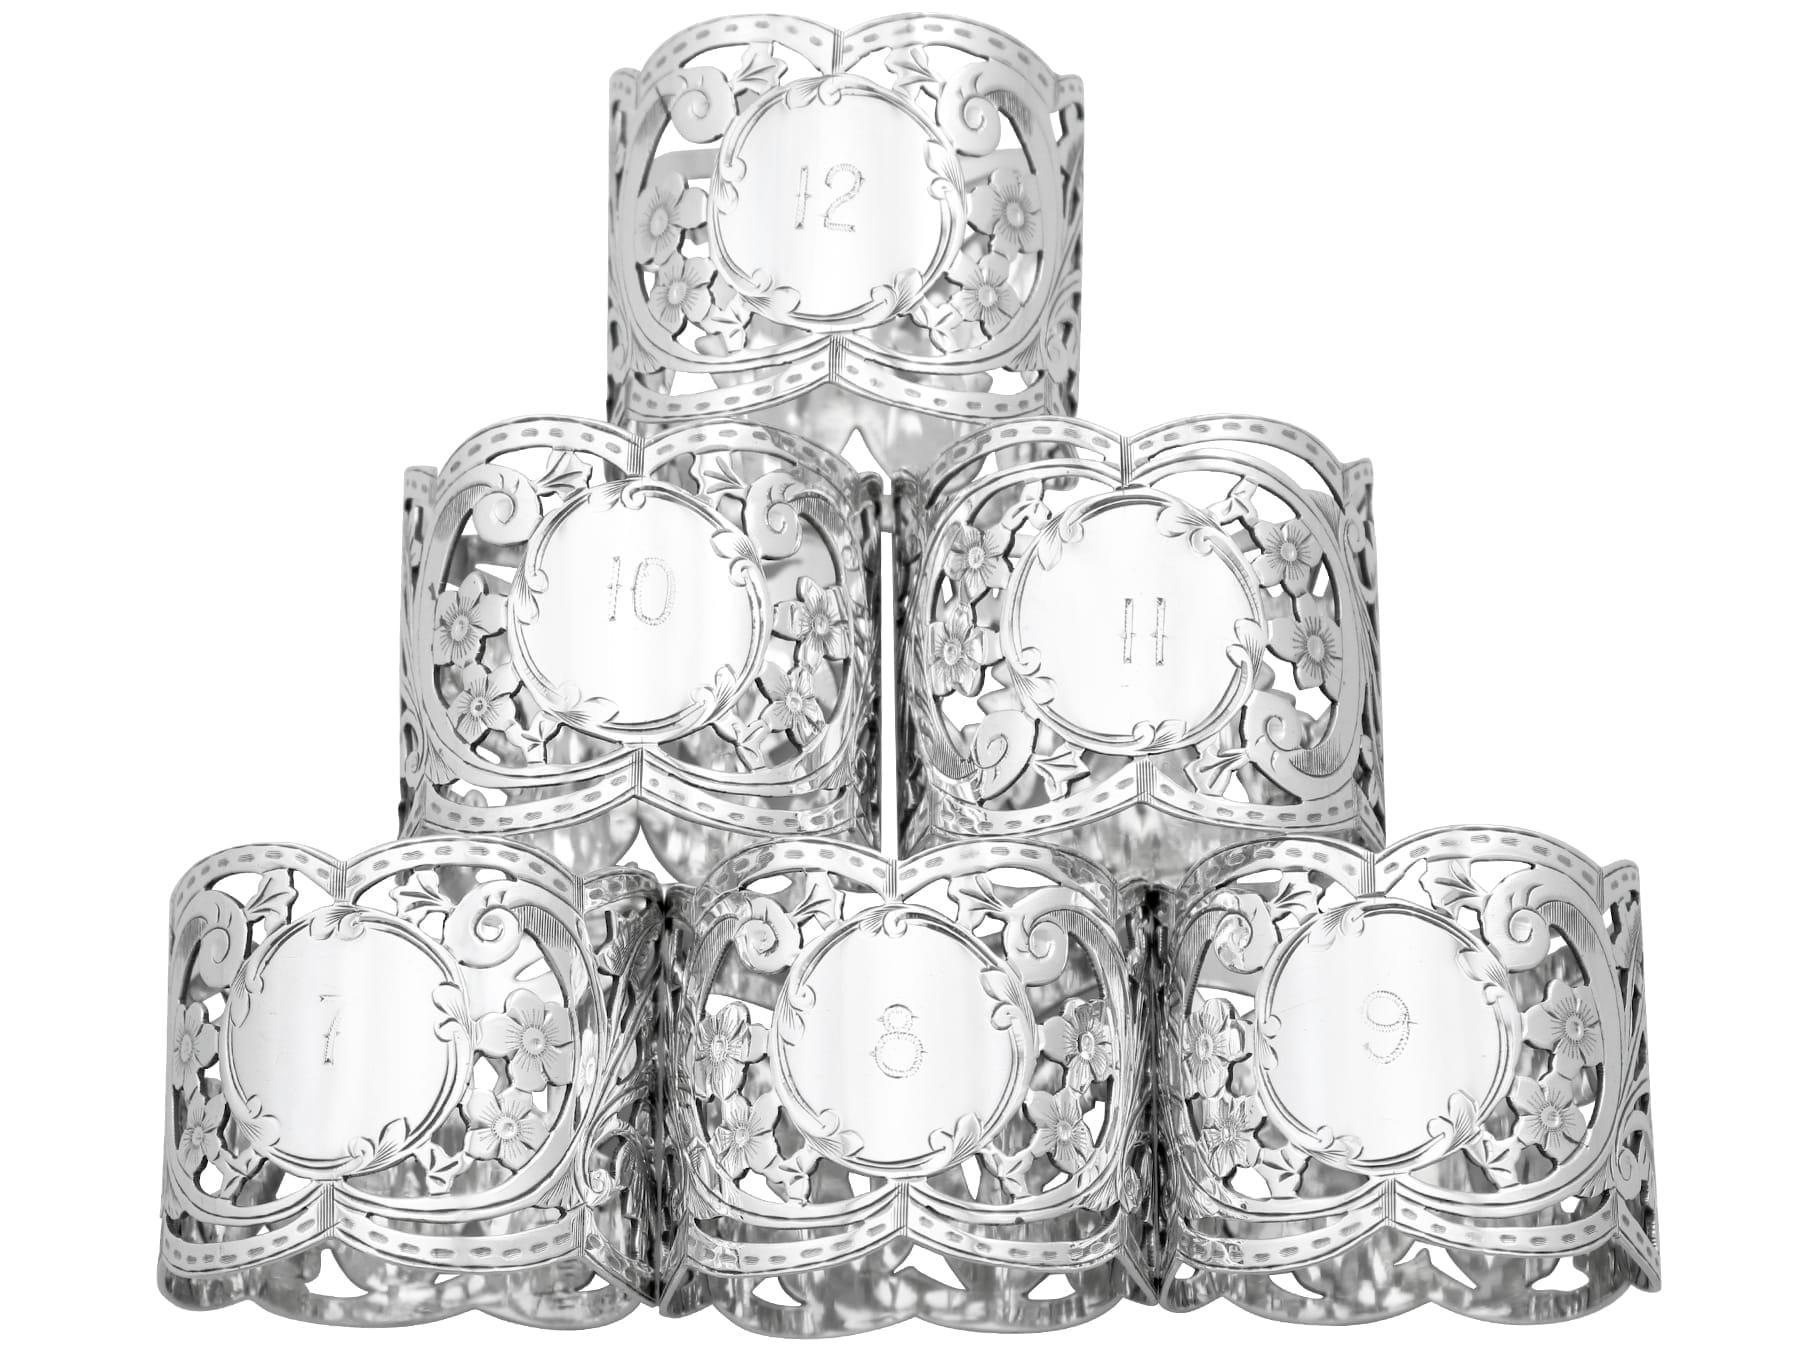 An exceptional, fine, and impressive set of 6 Antique Edwardian English sterling silver napkin rings - boxed; part of our dining silverware collection

These exceptional antique Edwardian sterling silver napkin rings have a cylindrical shaped